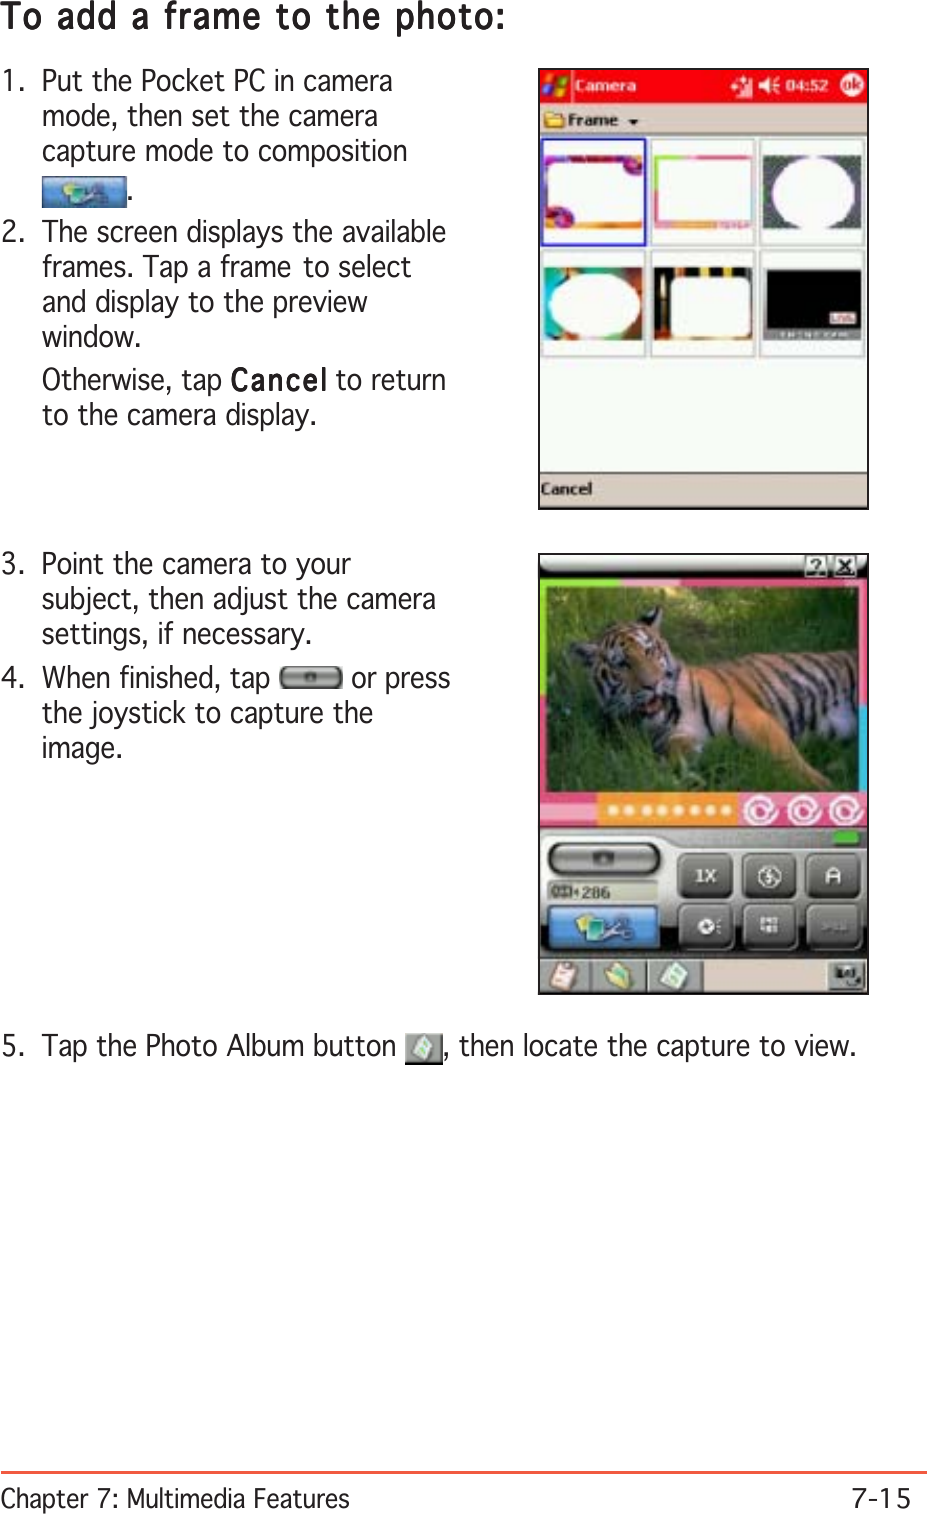 Chapter 7: Multimedia Features7-15To add a frame to the photo:To add a frame to the photo:To add a frame to the photo:To add a frame to the photo:To add a frame to the photo:1. Put the Pocket PC in cameramode, then set the cameracapture mode to composition.2. The screen displays the availableframes. Tap a frame to selectand display to the previewwindow.Otherwise, tap CancelCancelCancelCancelCan cel to returnto the camera display.5. Tap the Photo Album button  , then locate the capture to view.3. Point the camera to yoursubject, then adjust the camerasettings, if necessary.4. When finished, tap   or pressthe joystick to capture theimage.